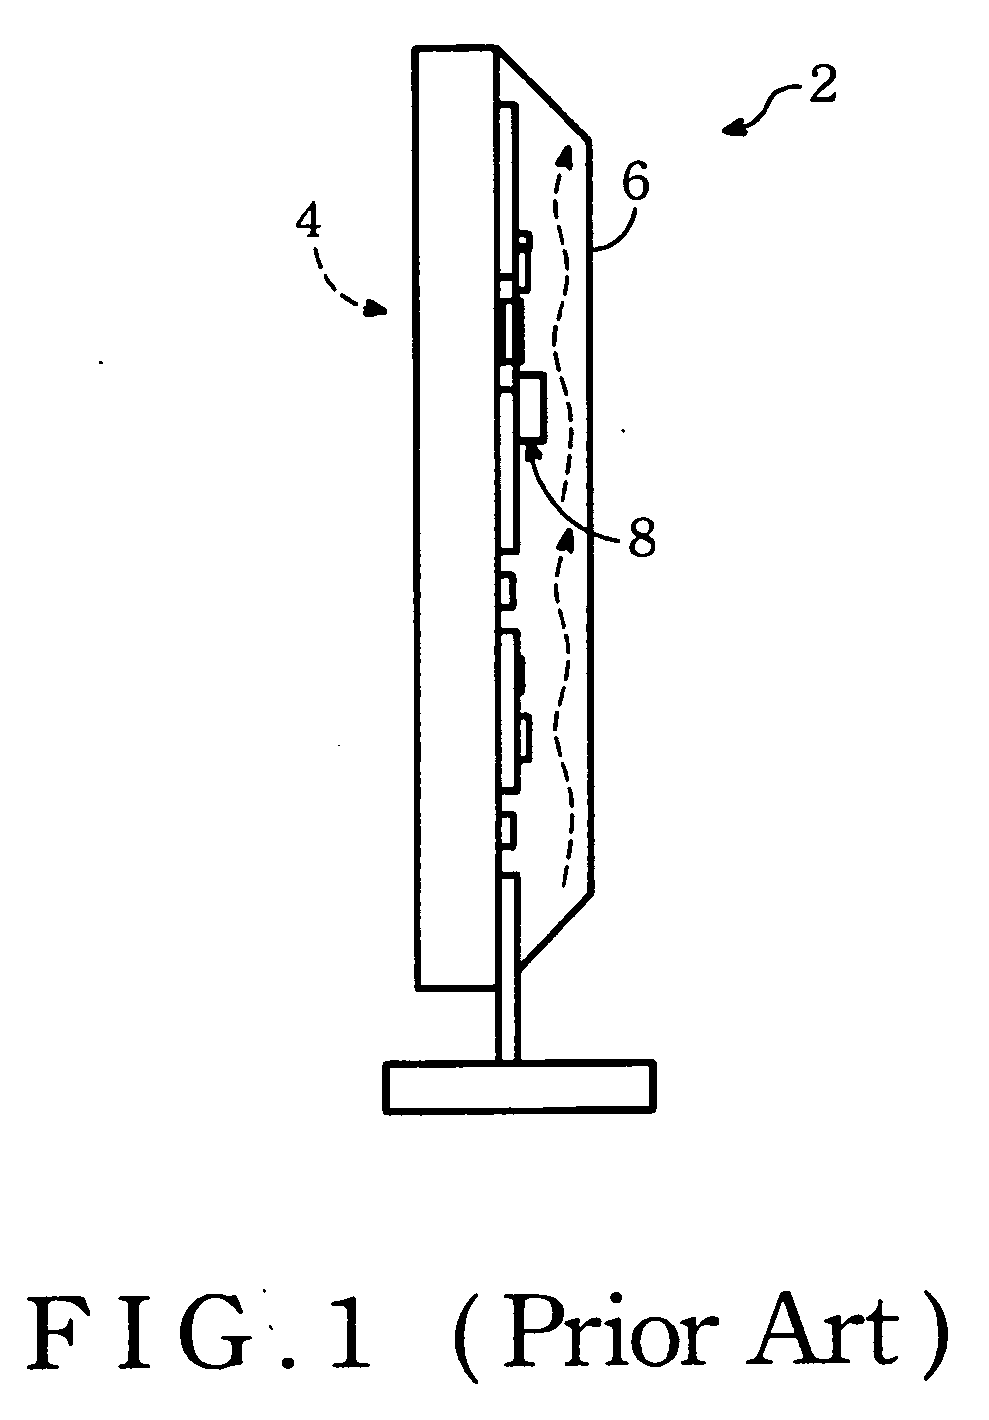 Heat-dissipating structure for flat panel display